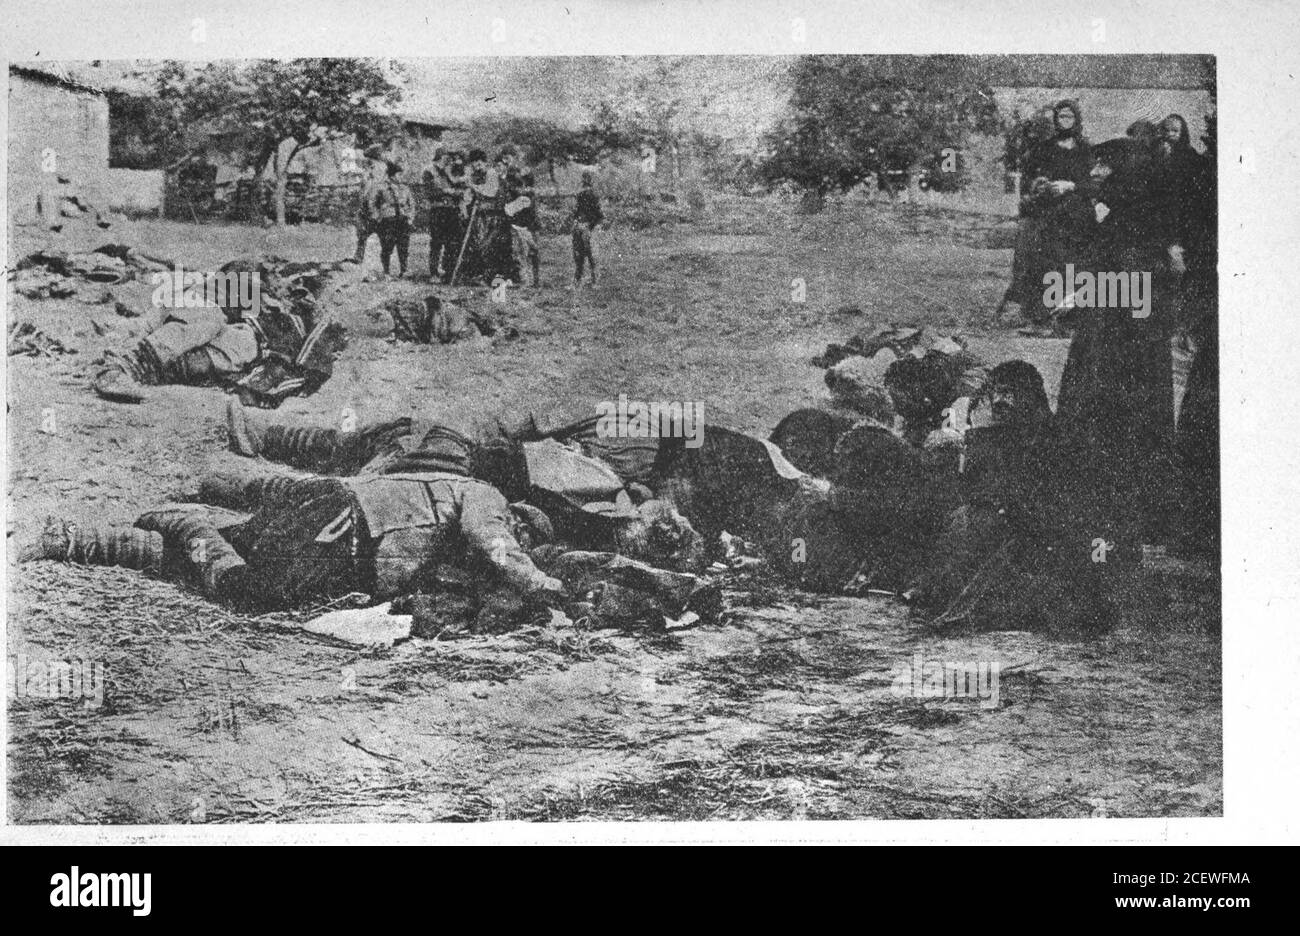 . The Roumanian atrocities over the Bulgarian population of Dobroudja abducted into Moldova. by the name of Mavon,who had been abducted and interned together with ourcountrymen in Galatz, but subsequently given his libertyby the use of money and influential friends, that all ourcountrymen, men as weil as women, have been searched,money and everything valuable has been confiscatedby the police officers, without any receipt being issued.From the well-to-do merchant Radi Bratoeff alone the Sub-Commisary Sharbanescu had taken 18,000 levas. For acertain time our countrymen were being installed in t Stock Photo